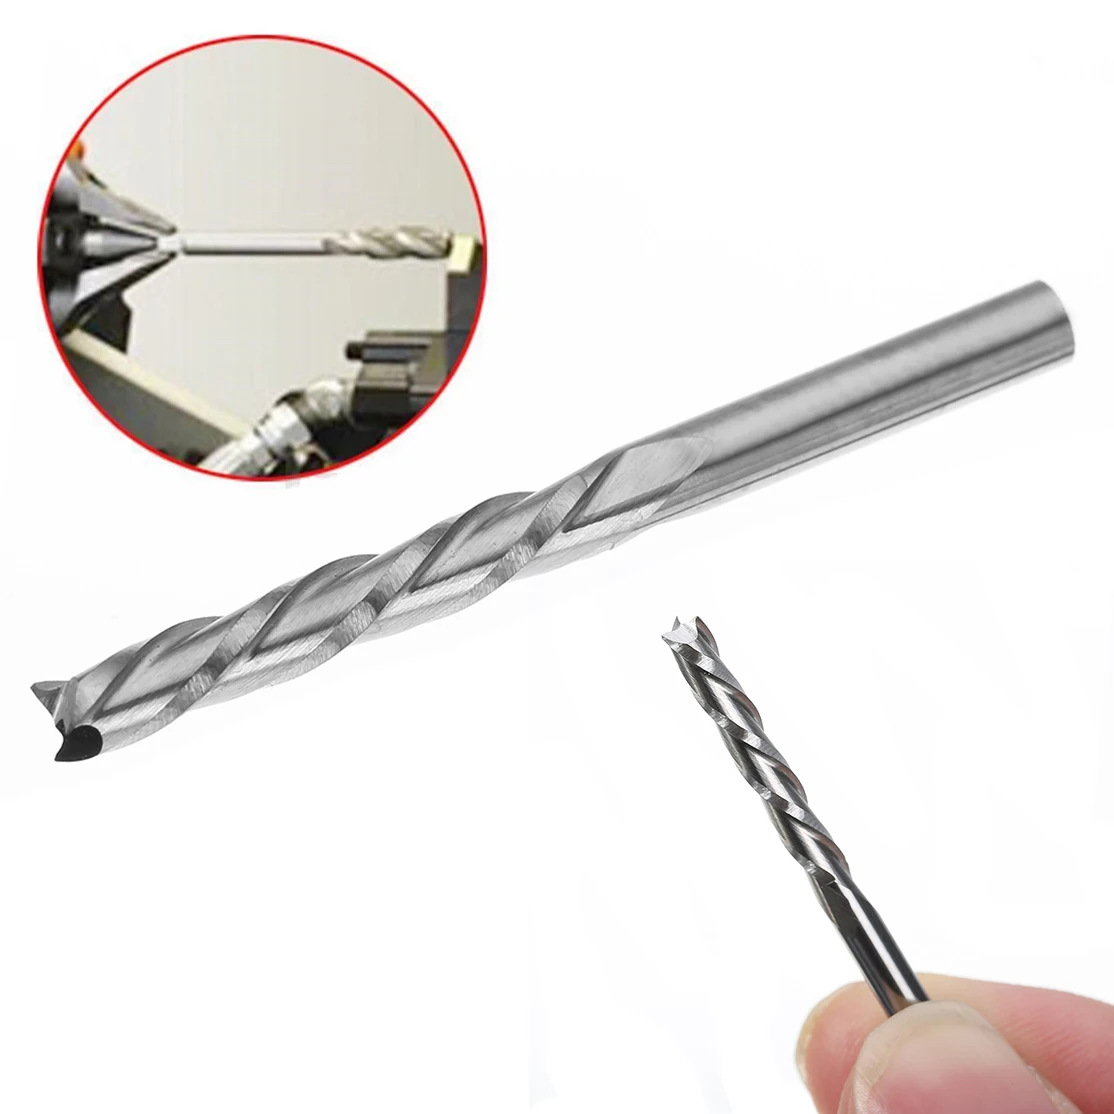 1/8" Shank Milling Cutter 3 Flute Router CNC Drill Bit End Mill 38mm Tools Sets 